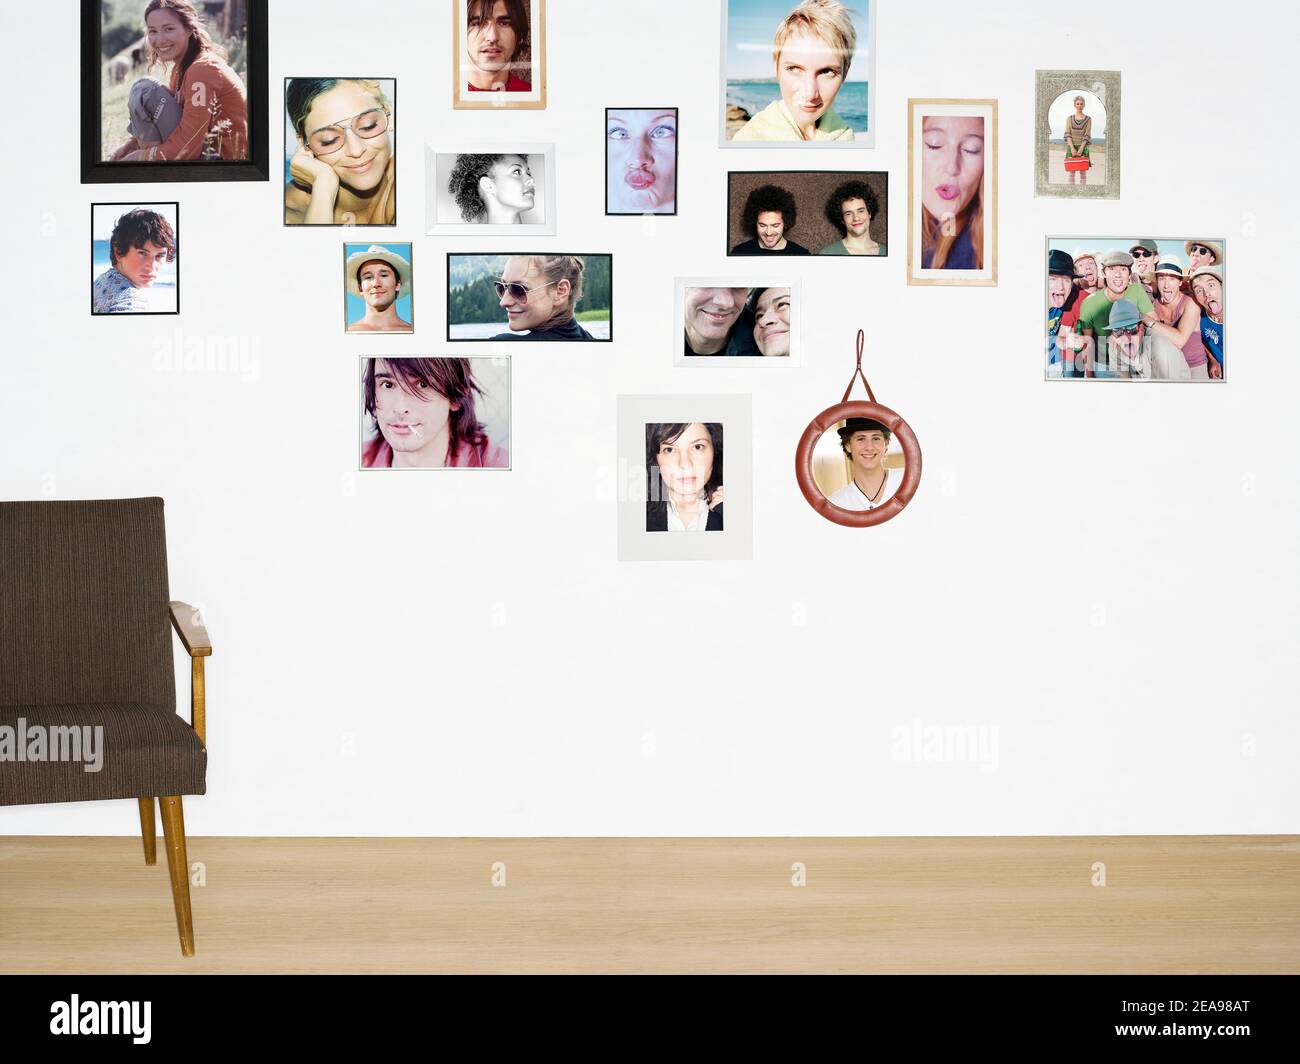 Wall with portrait photos of different people, in picture frames, wooden floor, empty chair Stock Photo